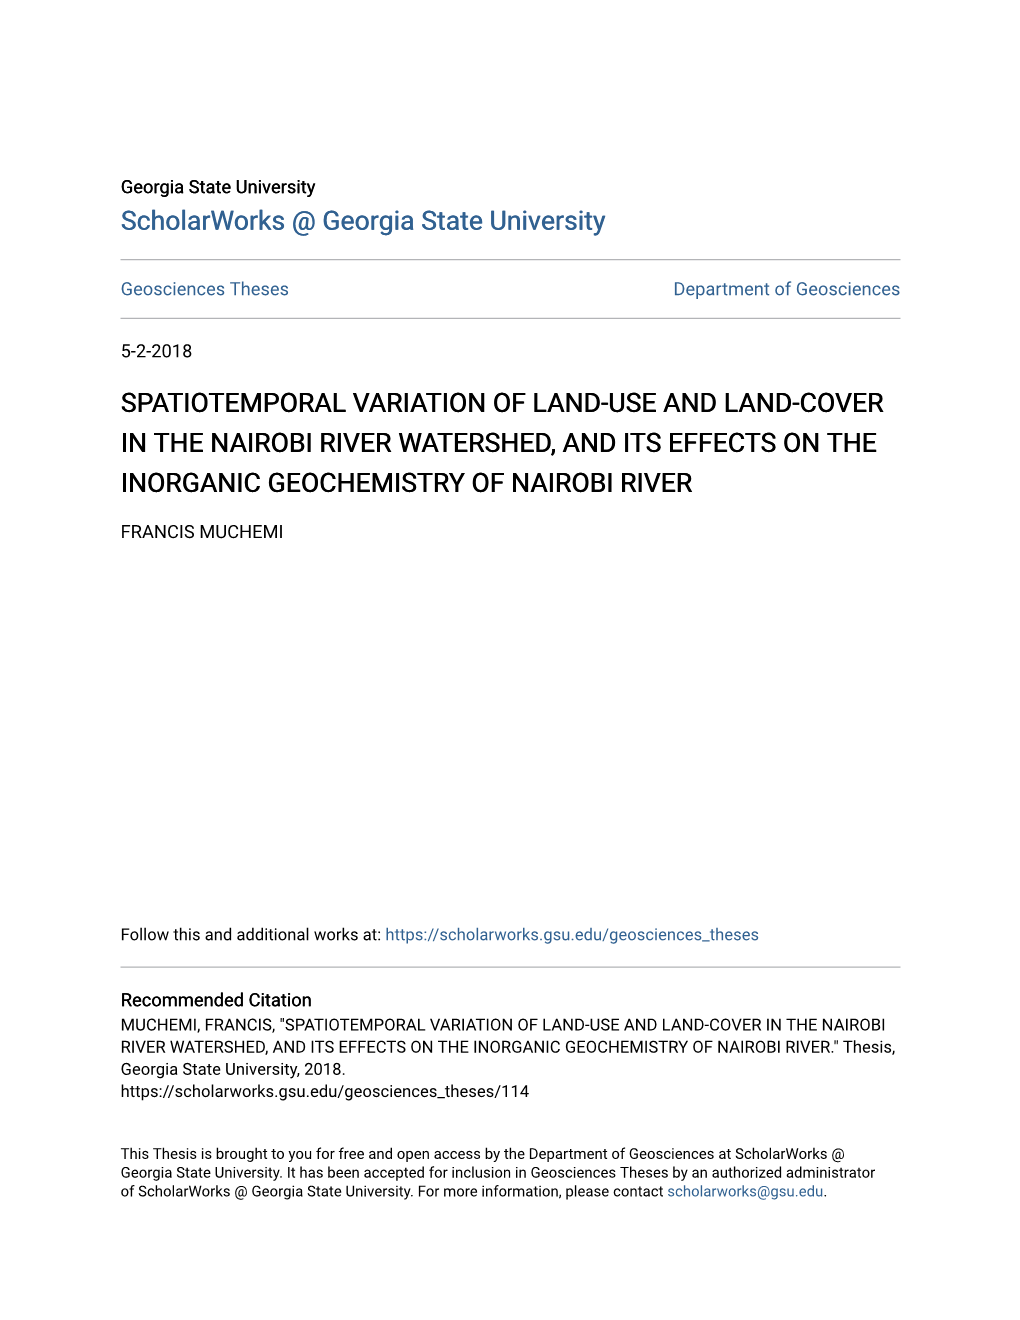 Spatiotemporal Variation of Land-Use and Land-Cover in the Nairobi River Watershed, and Its Effects on the Inorganic Geochemistry of Nairobi River